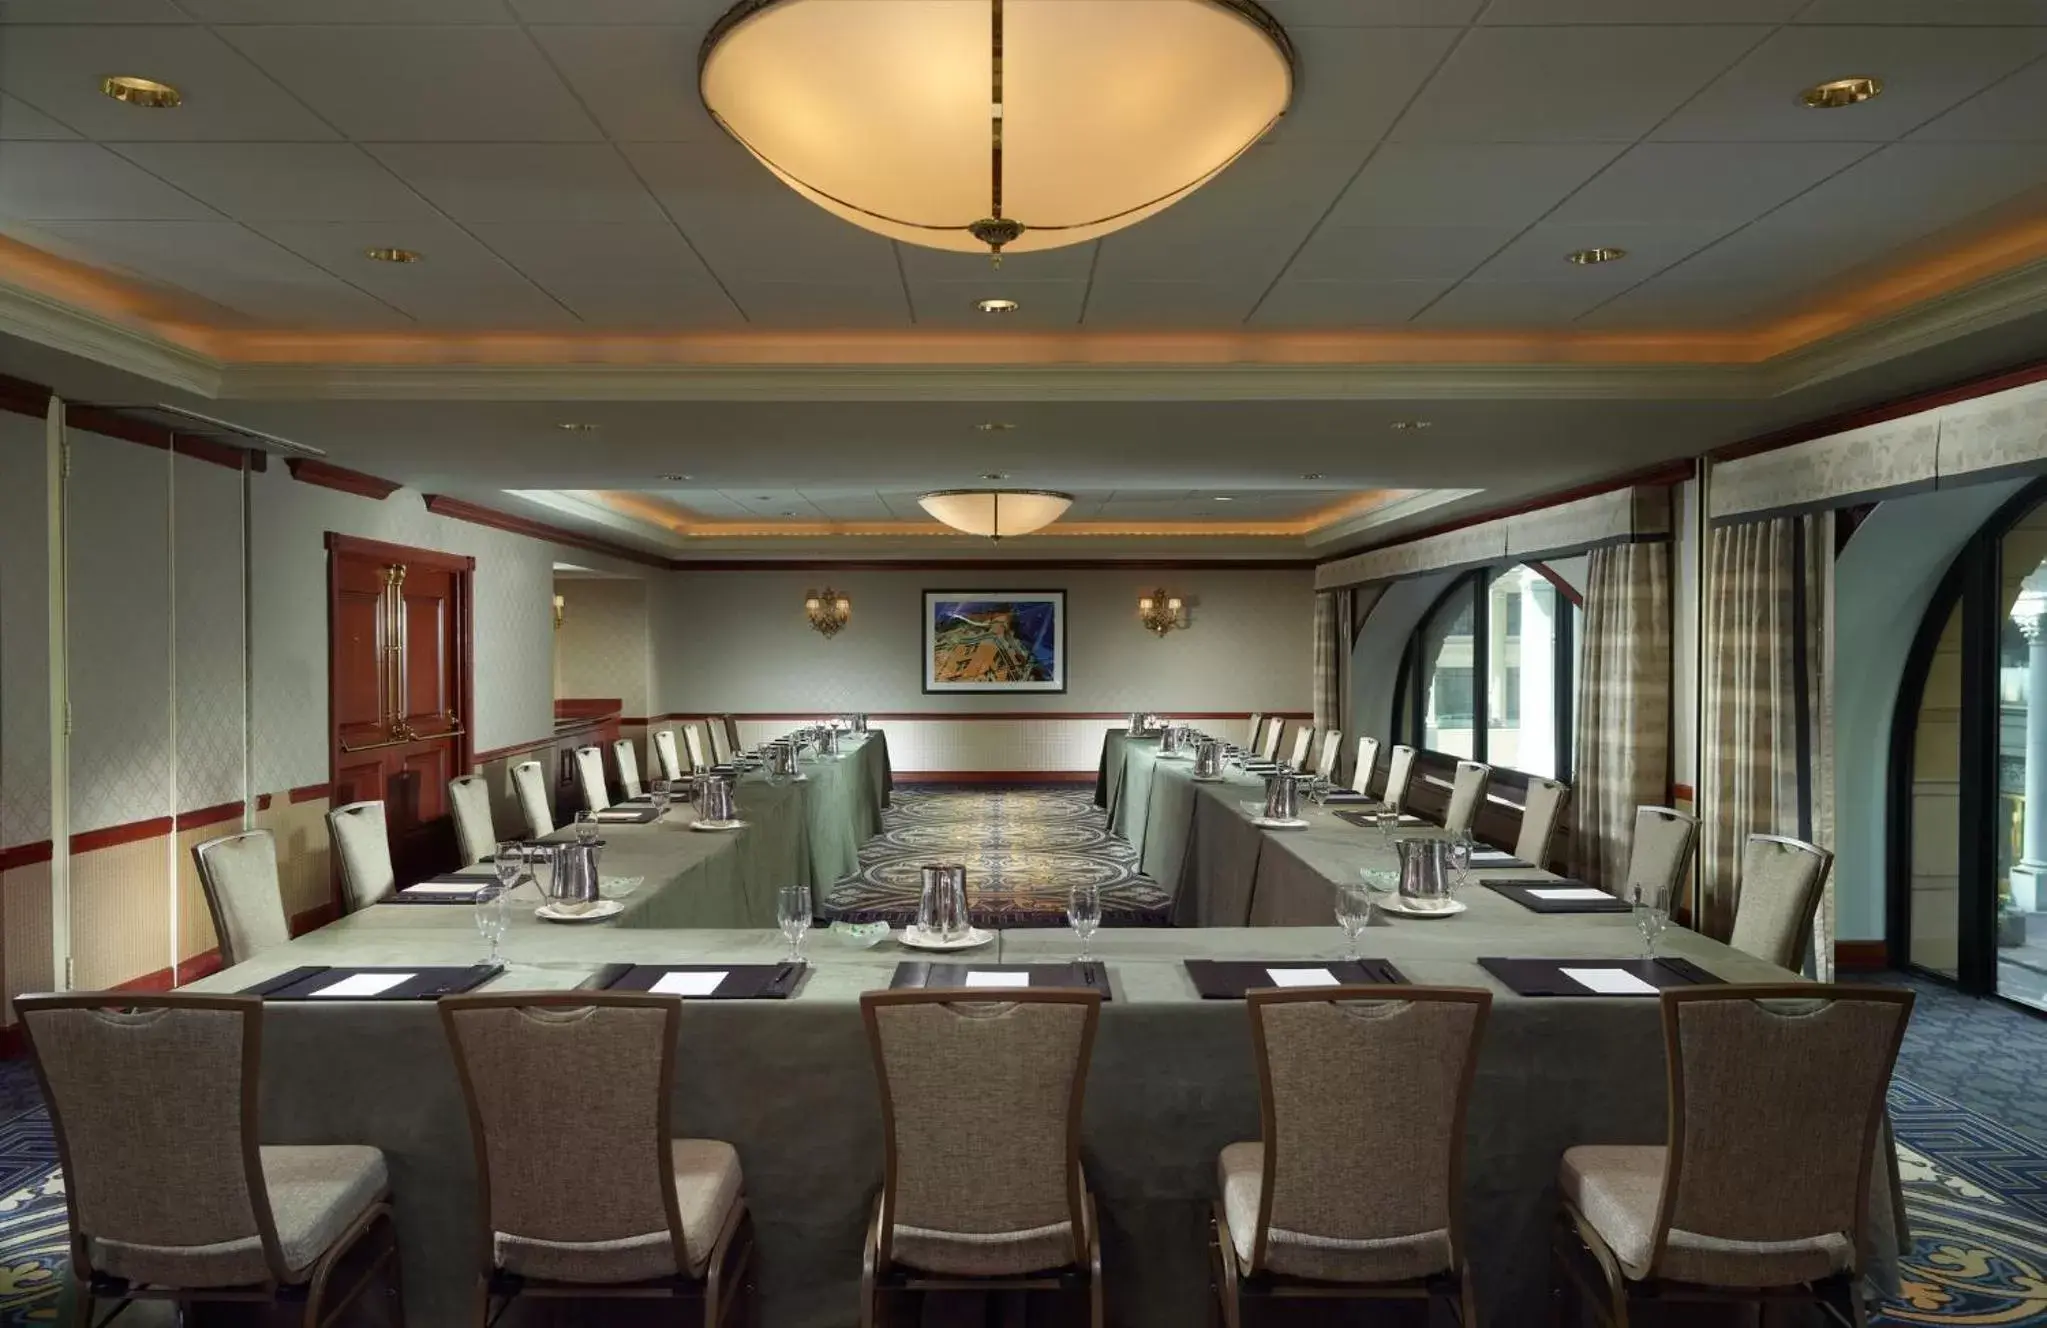 Meeting/conference room in Omni San Francisco